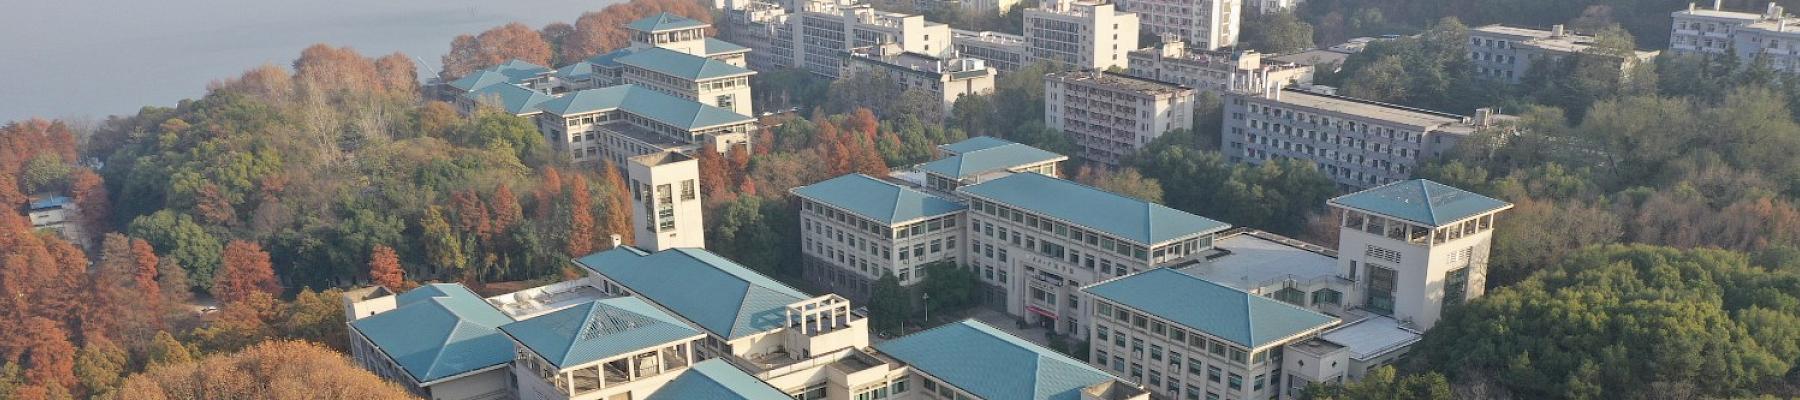 Wuhan University Law and Foreign Language Departments - Howchou, CC BY 4.0 , via Wikimedia Commons